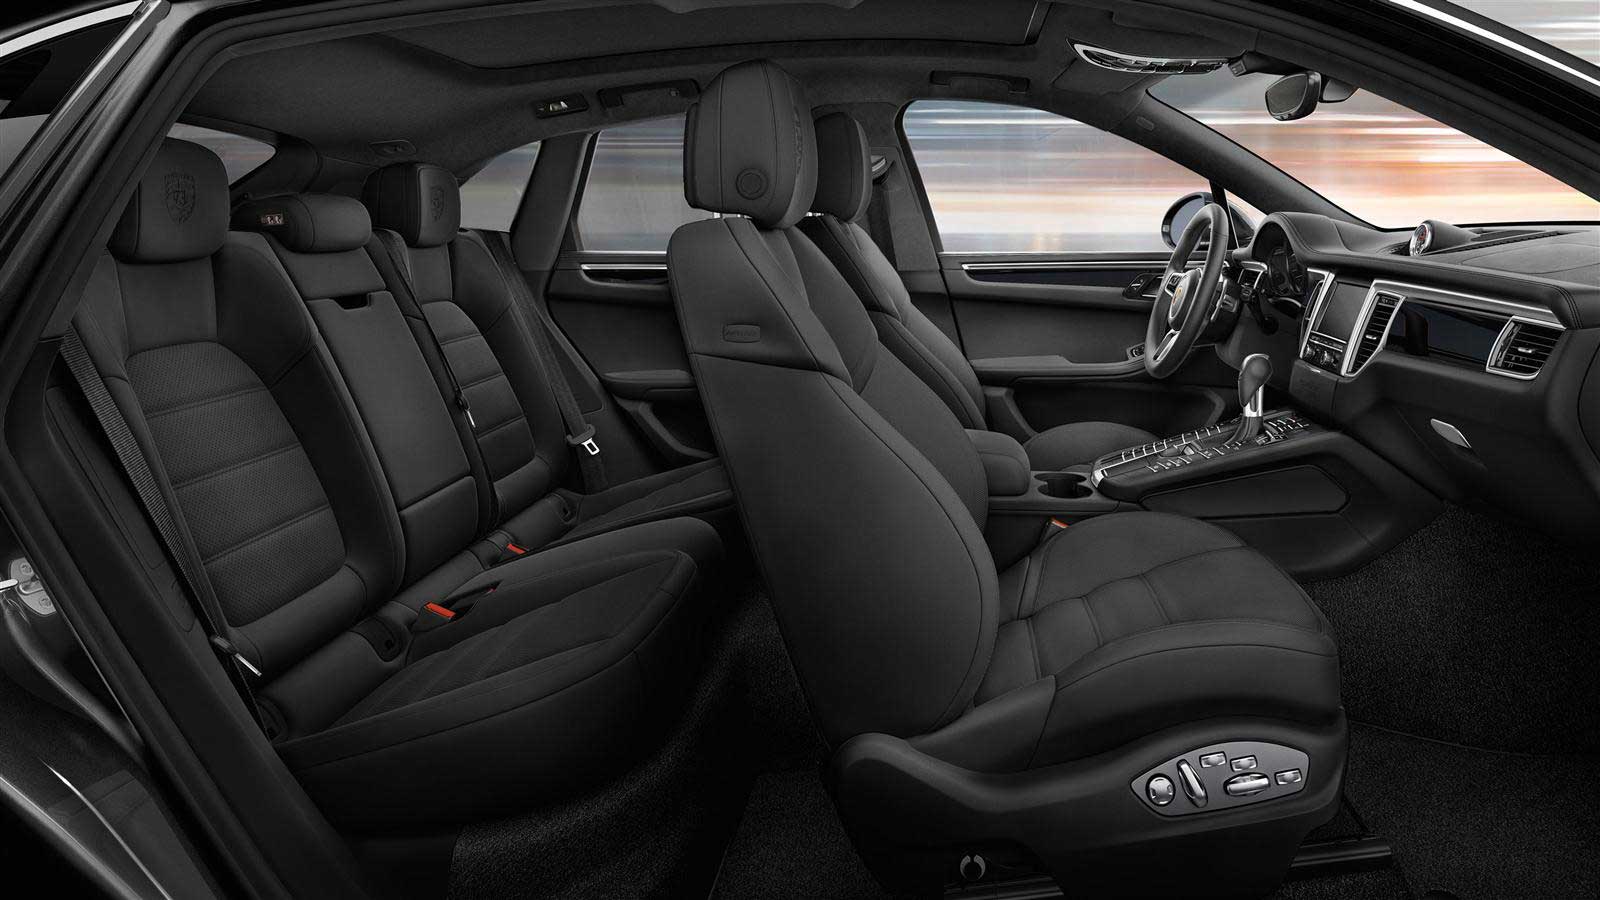 Porsch Macan Turbo Interior front and rear seats